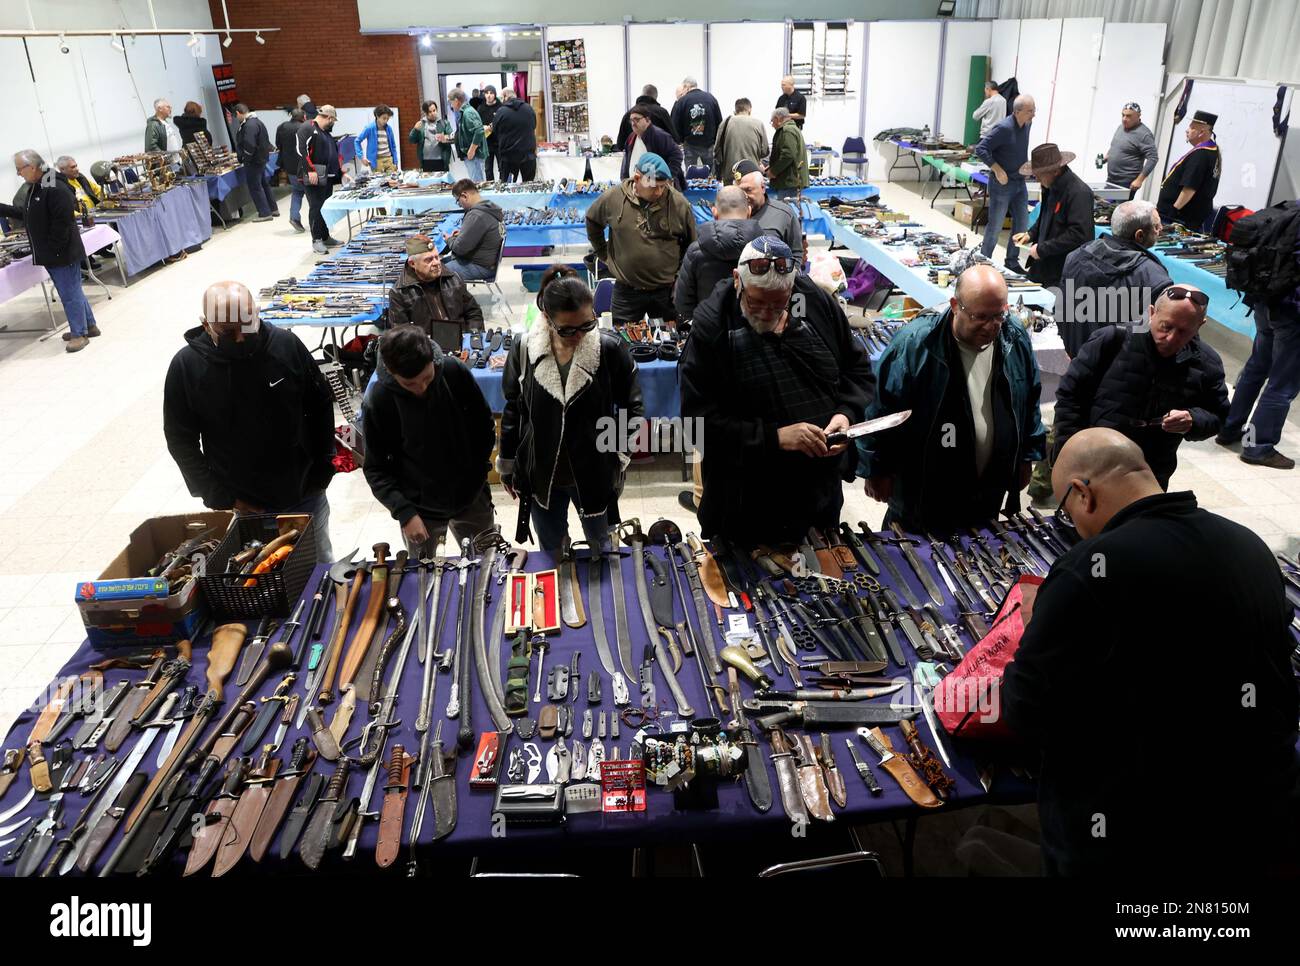 Ashkelon. 10th Feb, 2023. People visit an exhibition of historical cold weapons in the southern Israeli city of Ashkelon on Feb. 10, 2023. Swords, knives, bayonets, shields and other items from the 17th century to the middle of the 20th century were displayed at the exhibition. Credit: Gil Cohen Magen/Xinhua/Alamy Live News Stock Photo